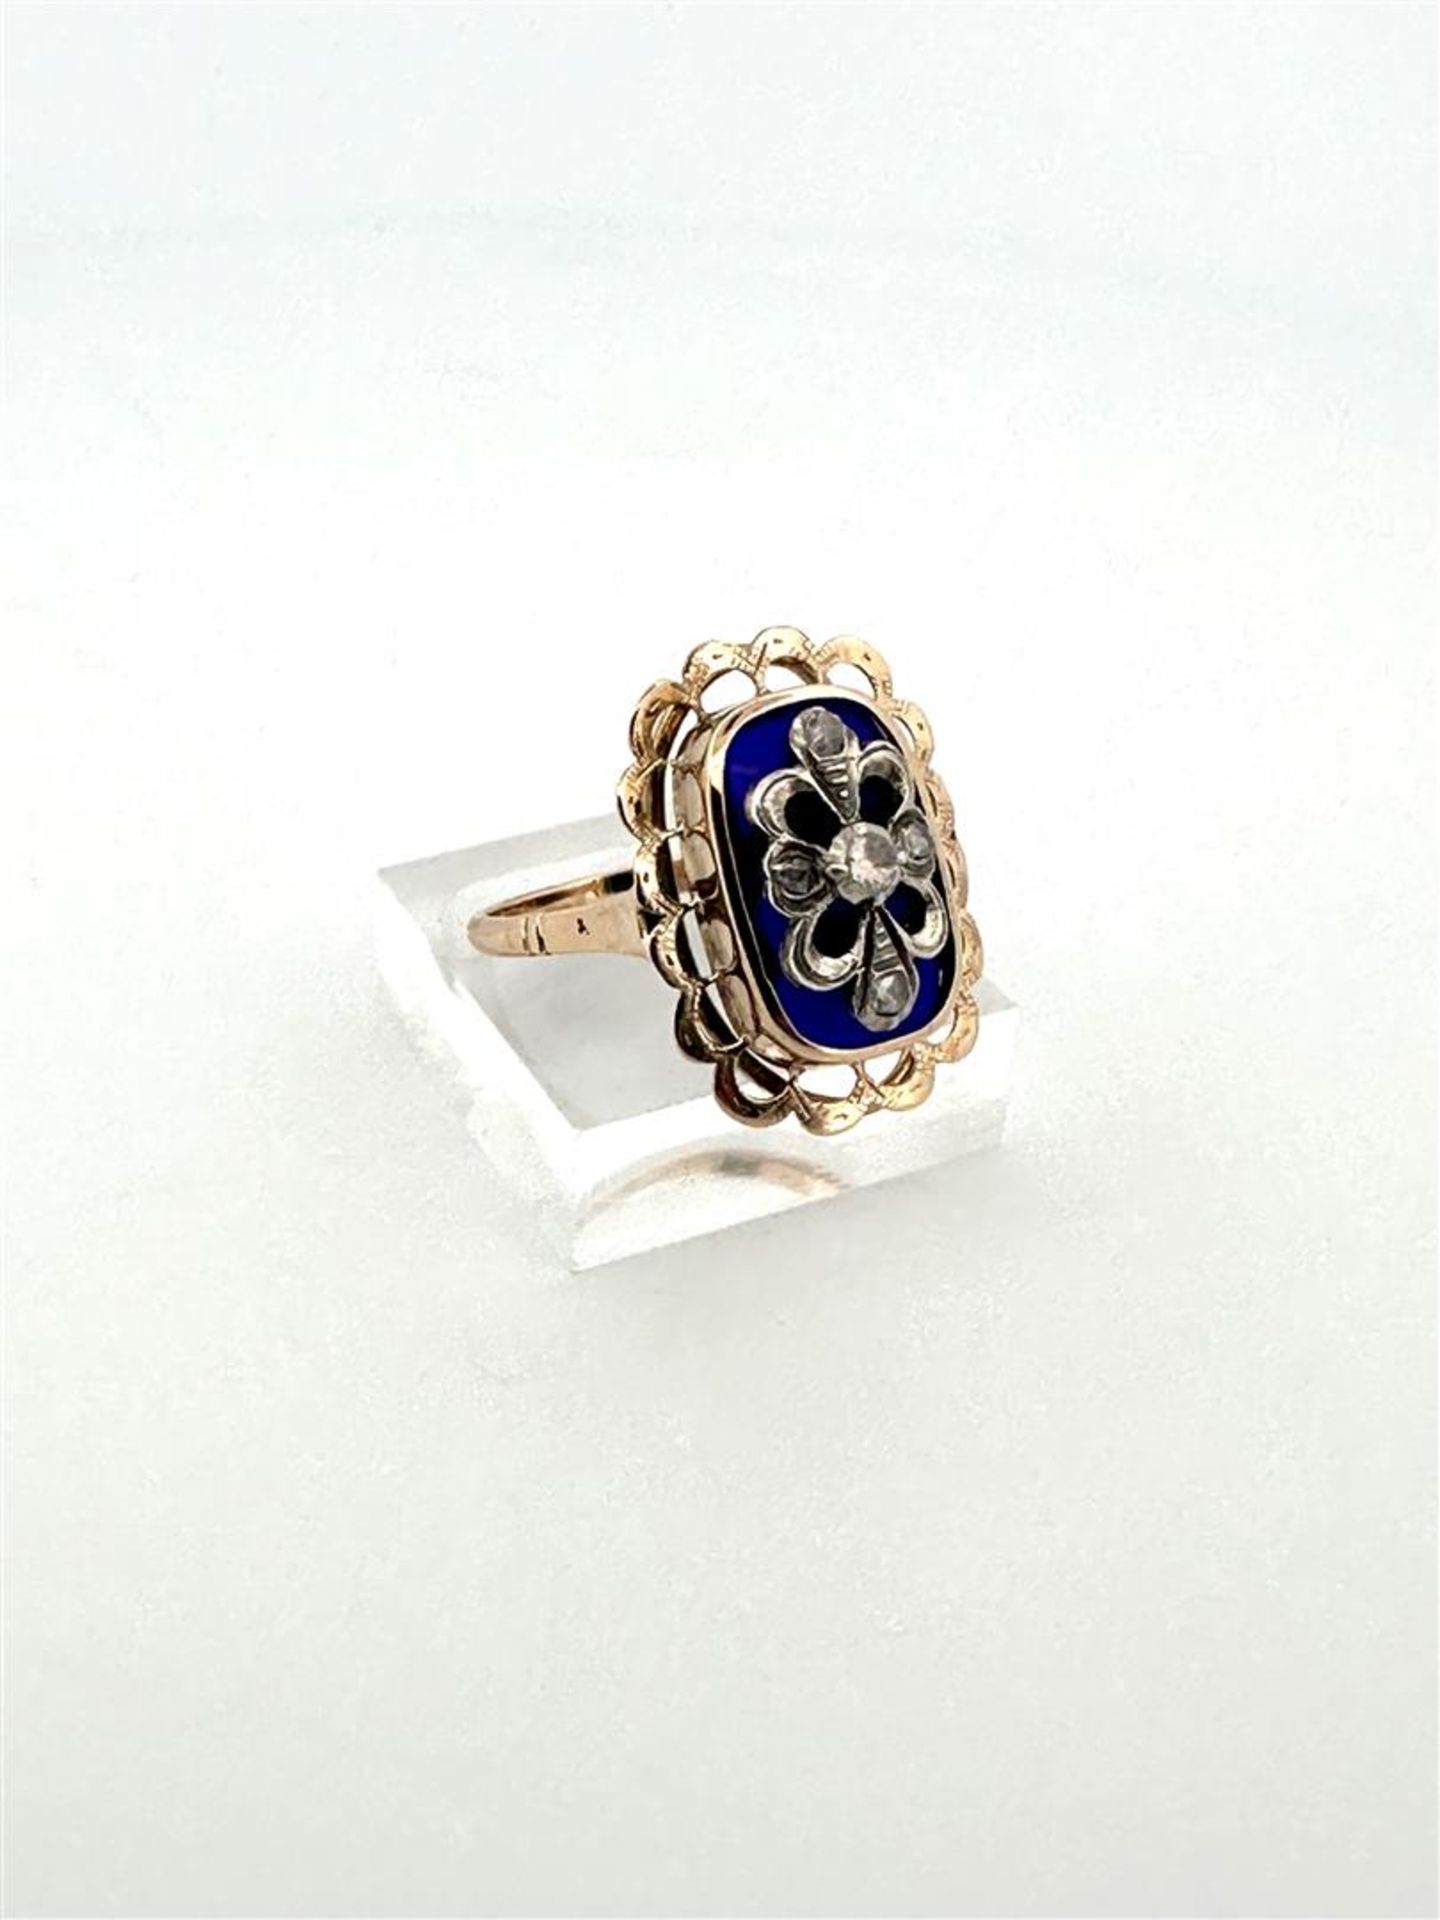 14kt bicolor gold antique appliqué ring with openwork scalloped edge, blue glass and rough diamond.
